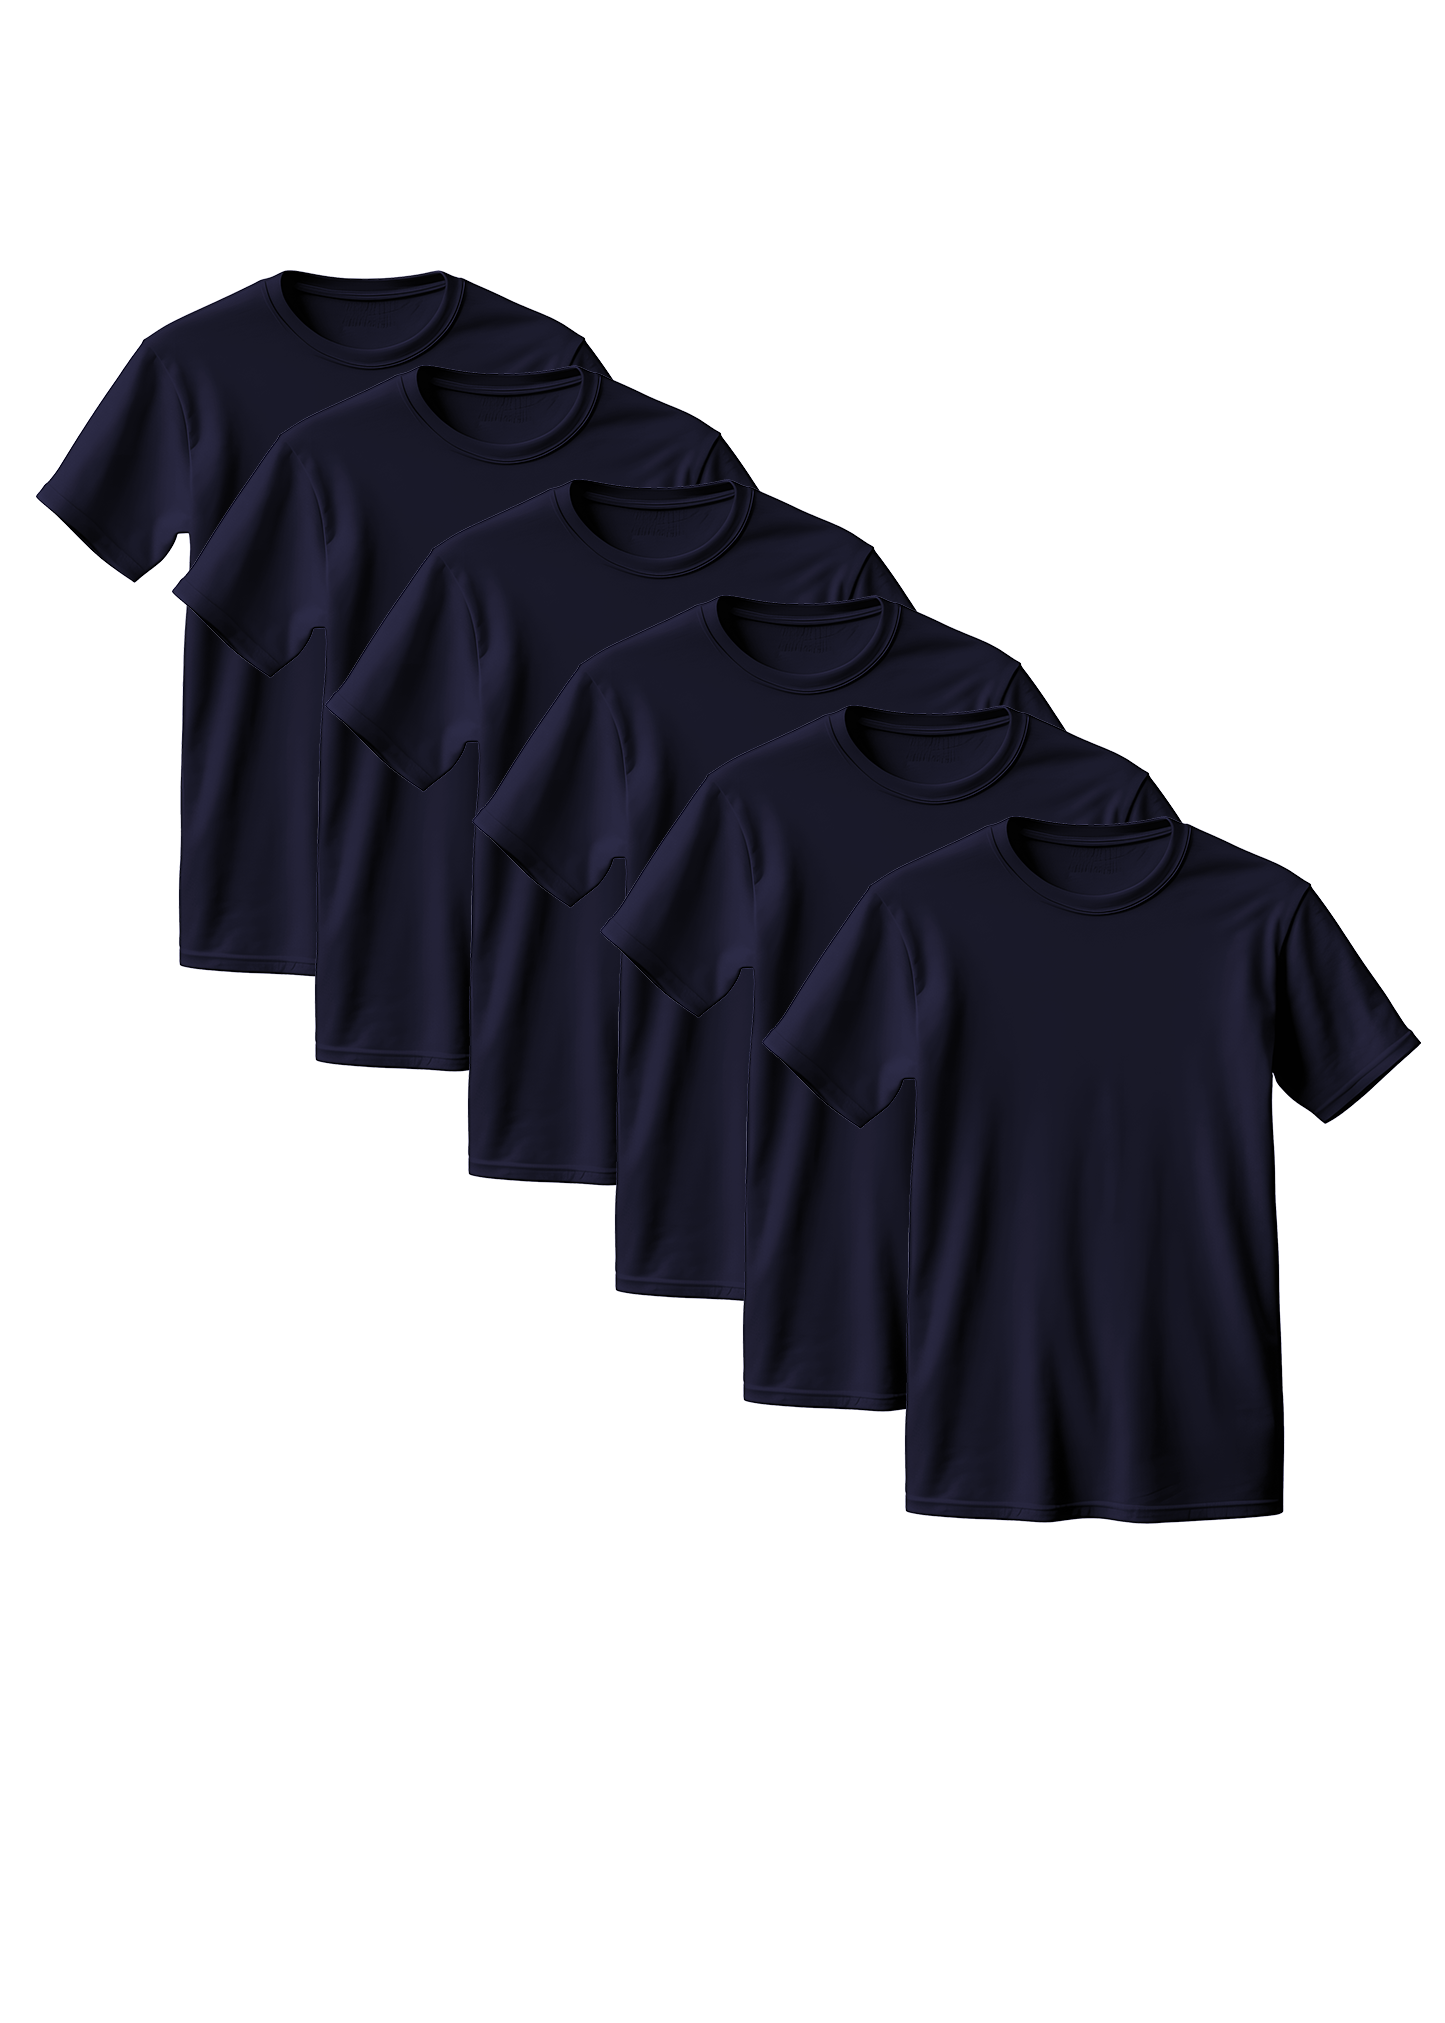 Navy Combed Cotton T-Shirt 6-Pack